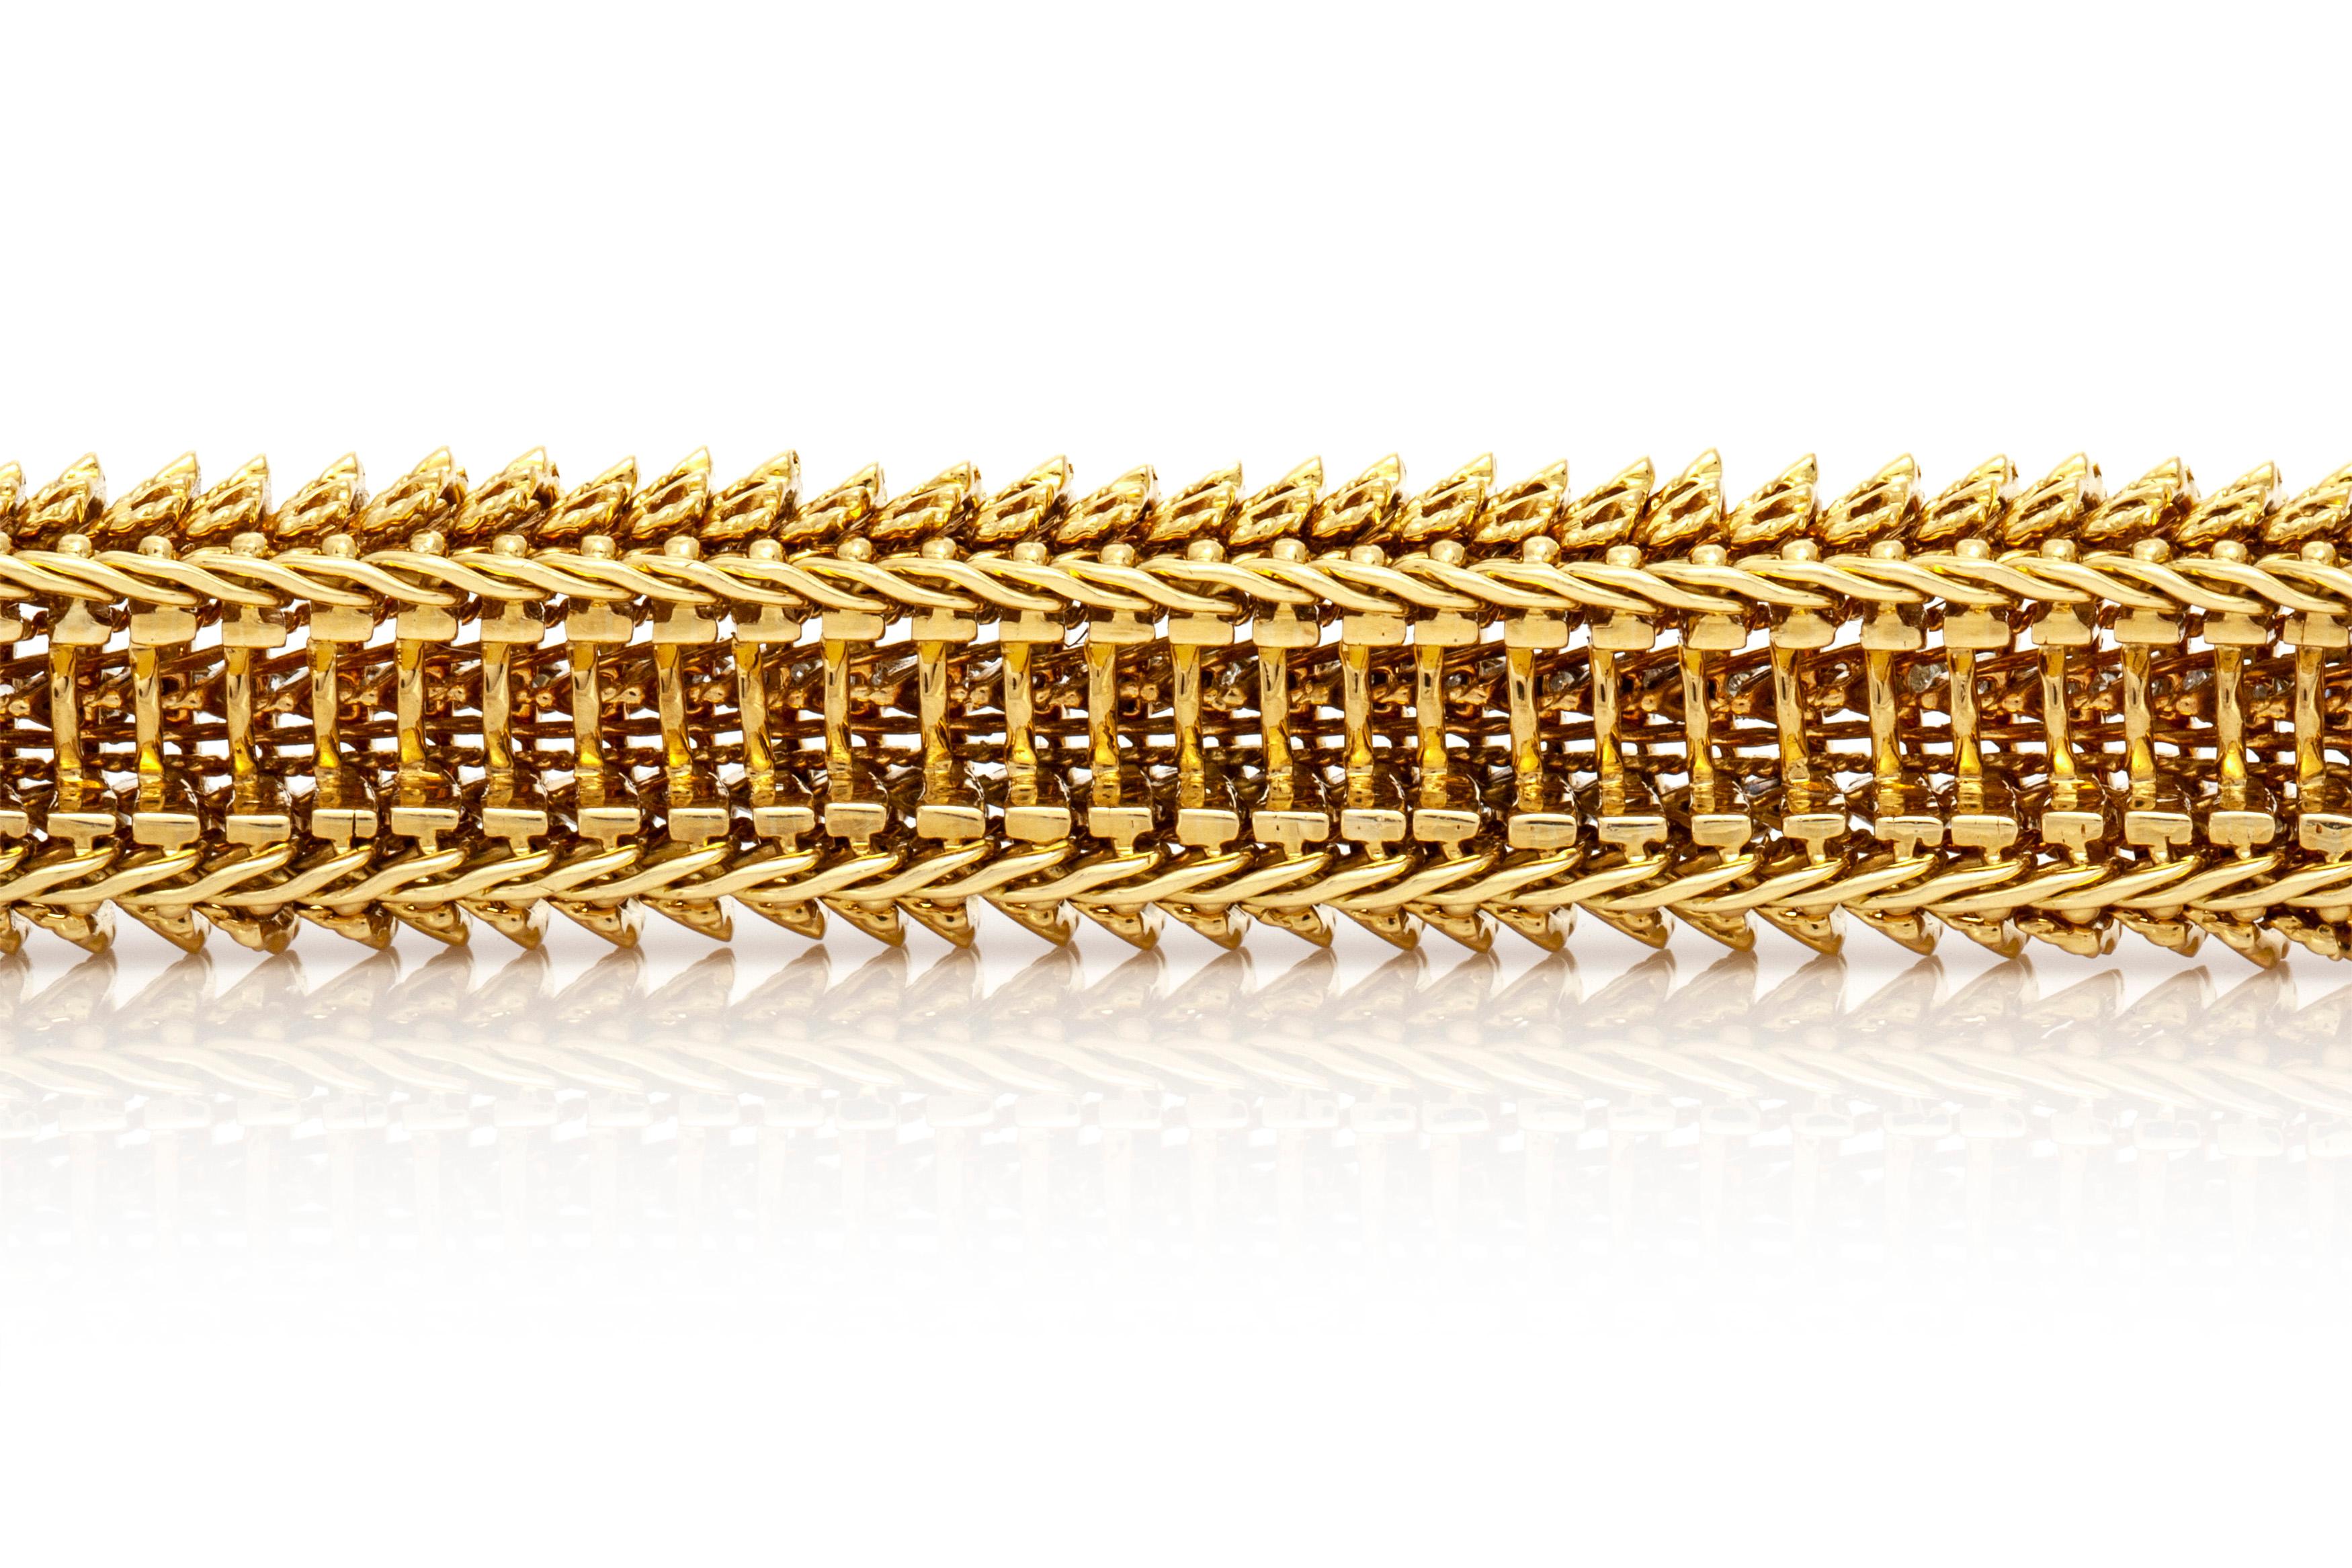 The bracelet is finely crafted in 18k yellow gold with beautiful texture and diamonds weighing approximately total of 5.00 carat.